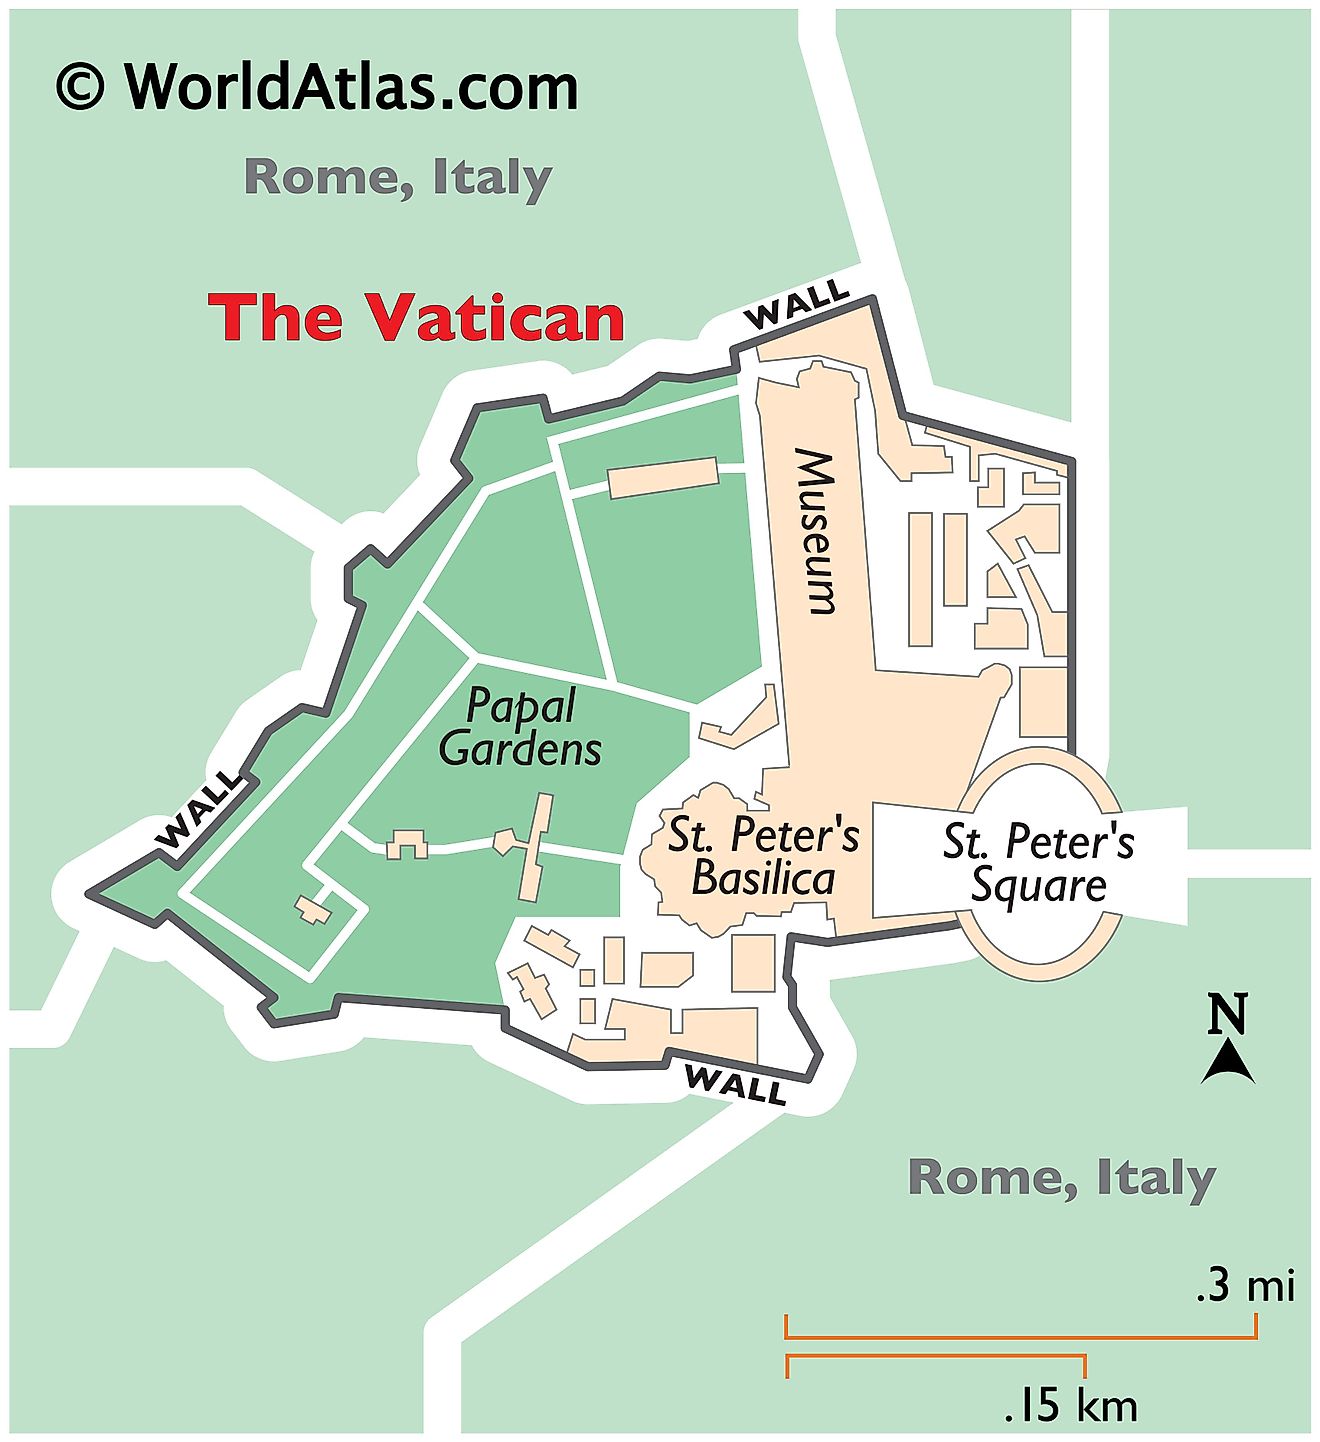 Physical Map of the Vatican City showing its main buildings, wall surrounding the state, the Papal Gardens, etc.